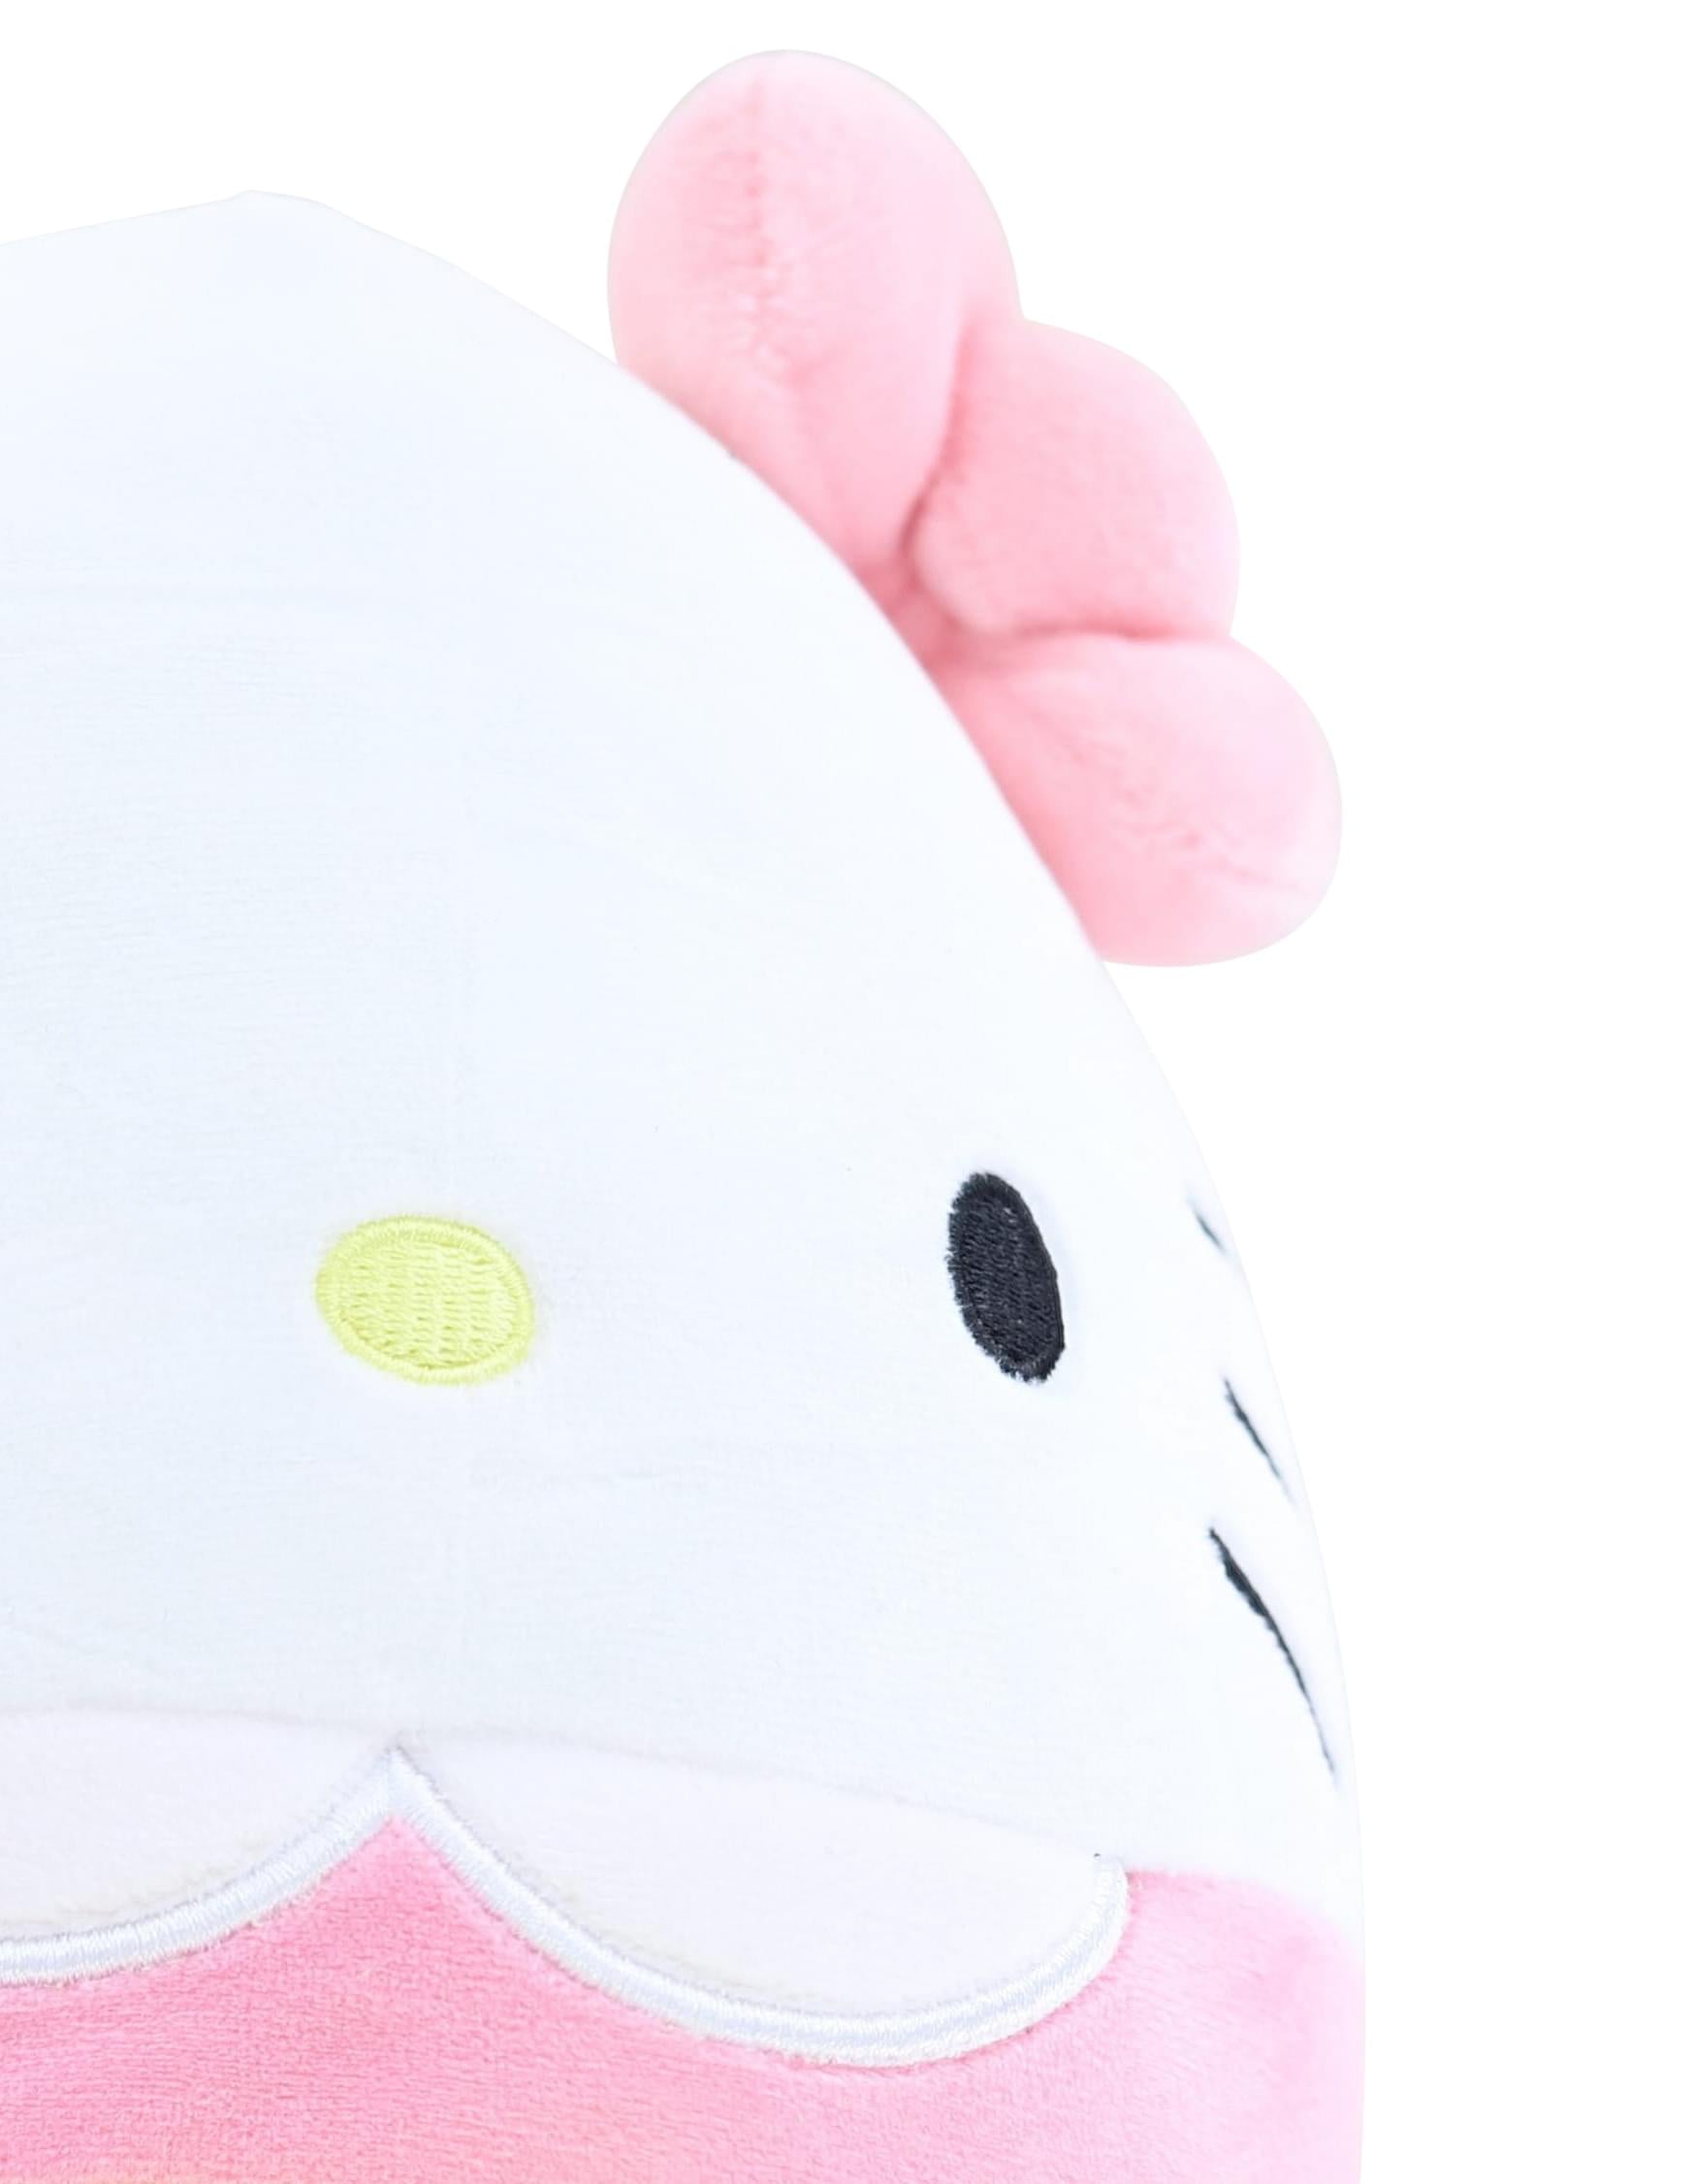 Hello Kitty Easter 8 Inch Squishmallow Plush | Hello Kitty in Plaid Skirt